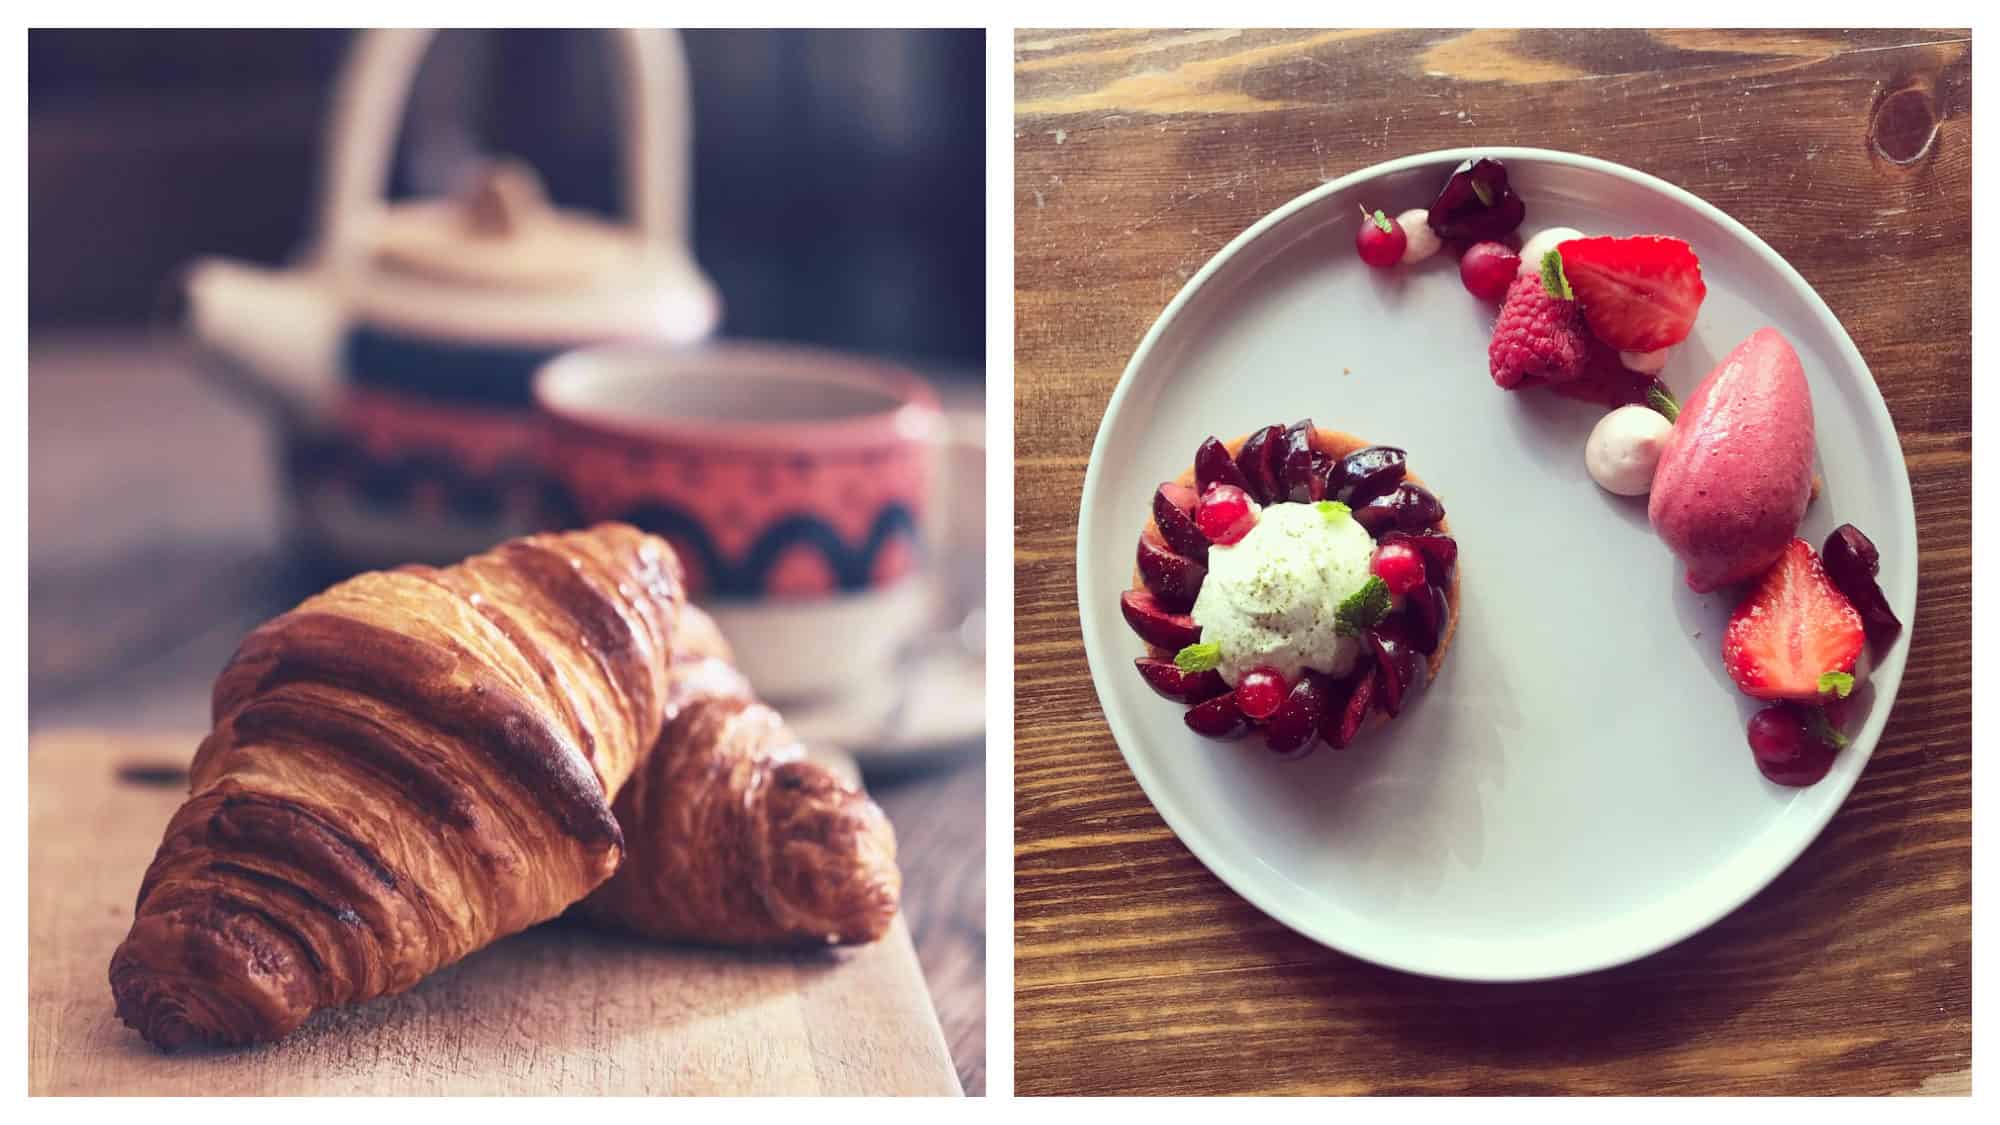 Café Mirabelle is a top spot for coffee and cake in Paris, especially its crusty croissants (left) and fruit meringue tarts (right).